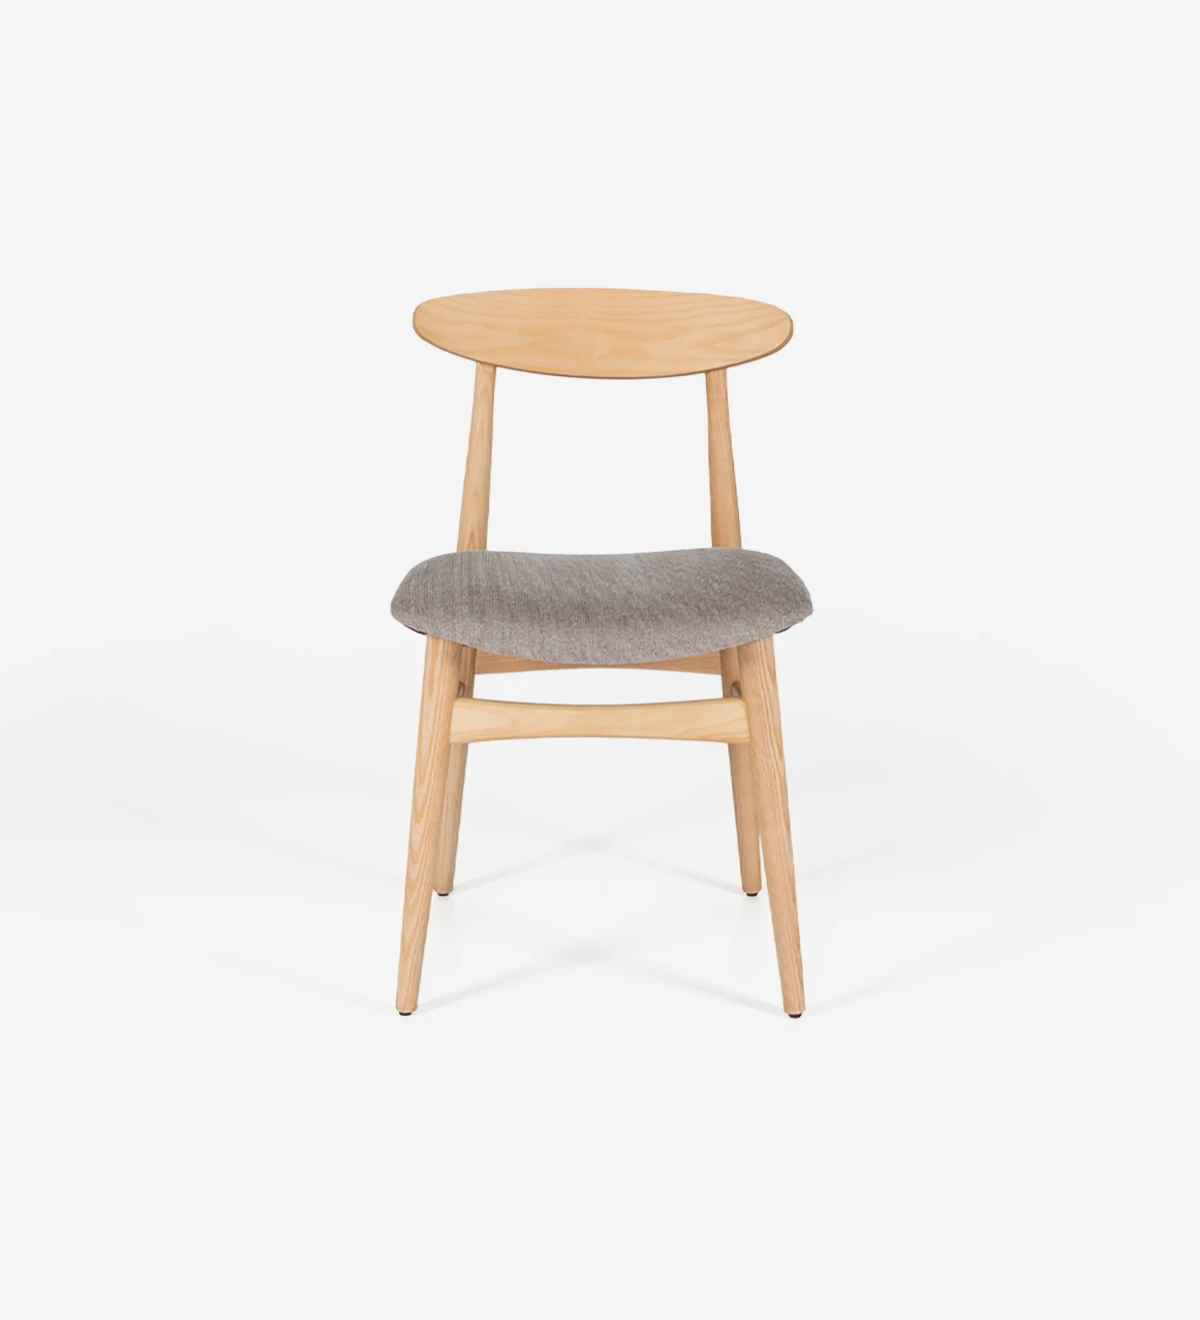 Natural color ash wood chair with fabric upholstered seat.